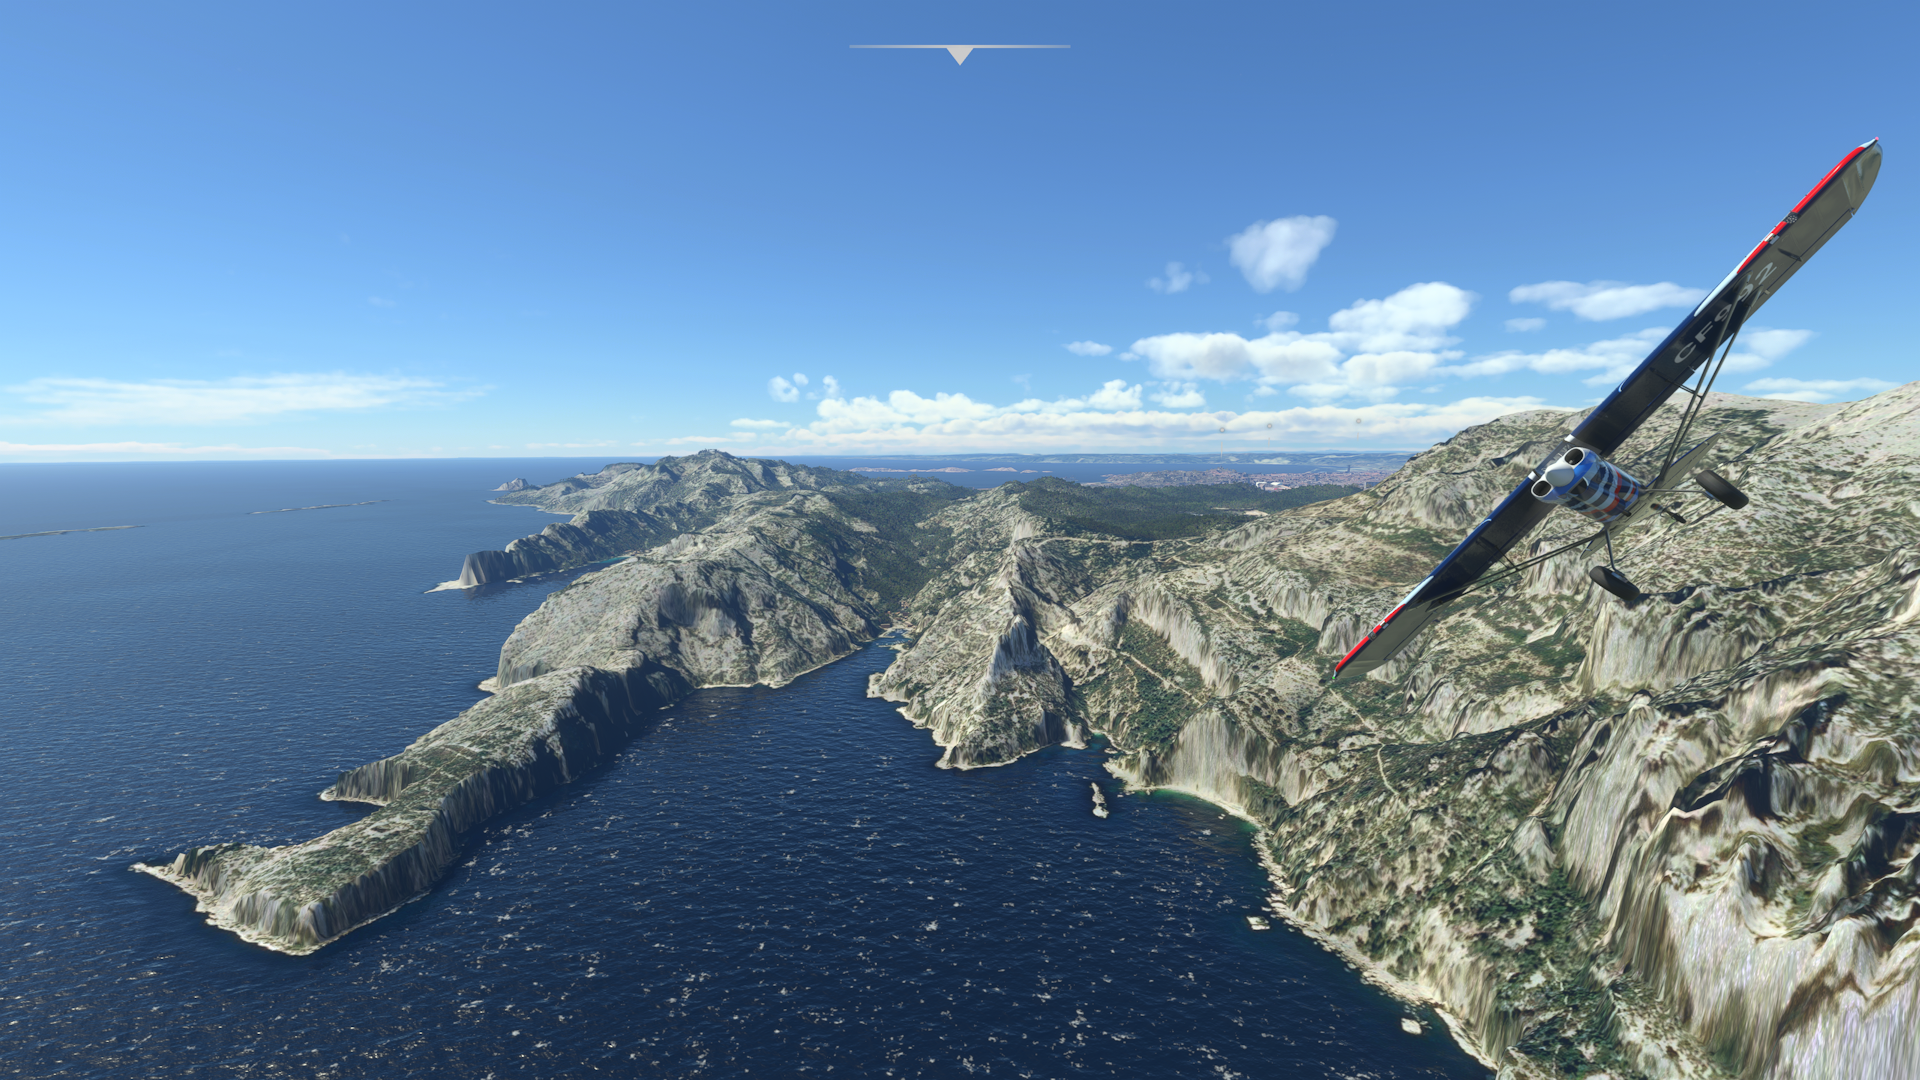 Flight over the Calanque de Sugiton in Southern France in a CubCrafter | Microsoft Flight Simulator